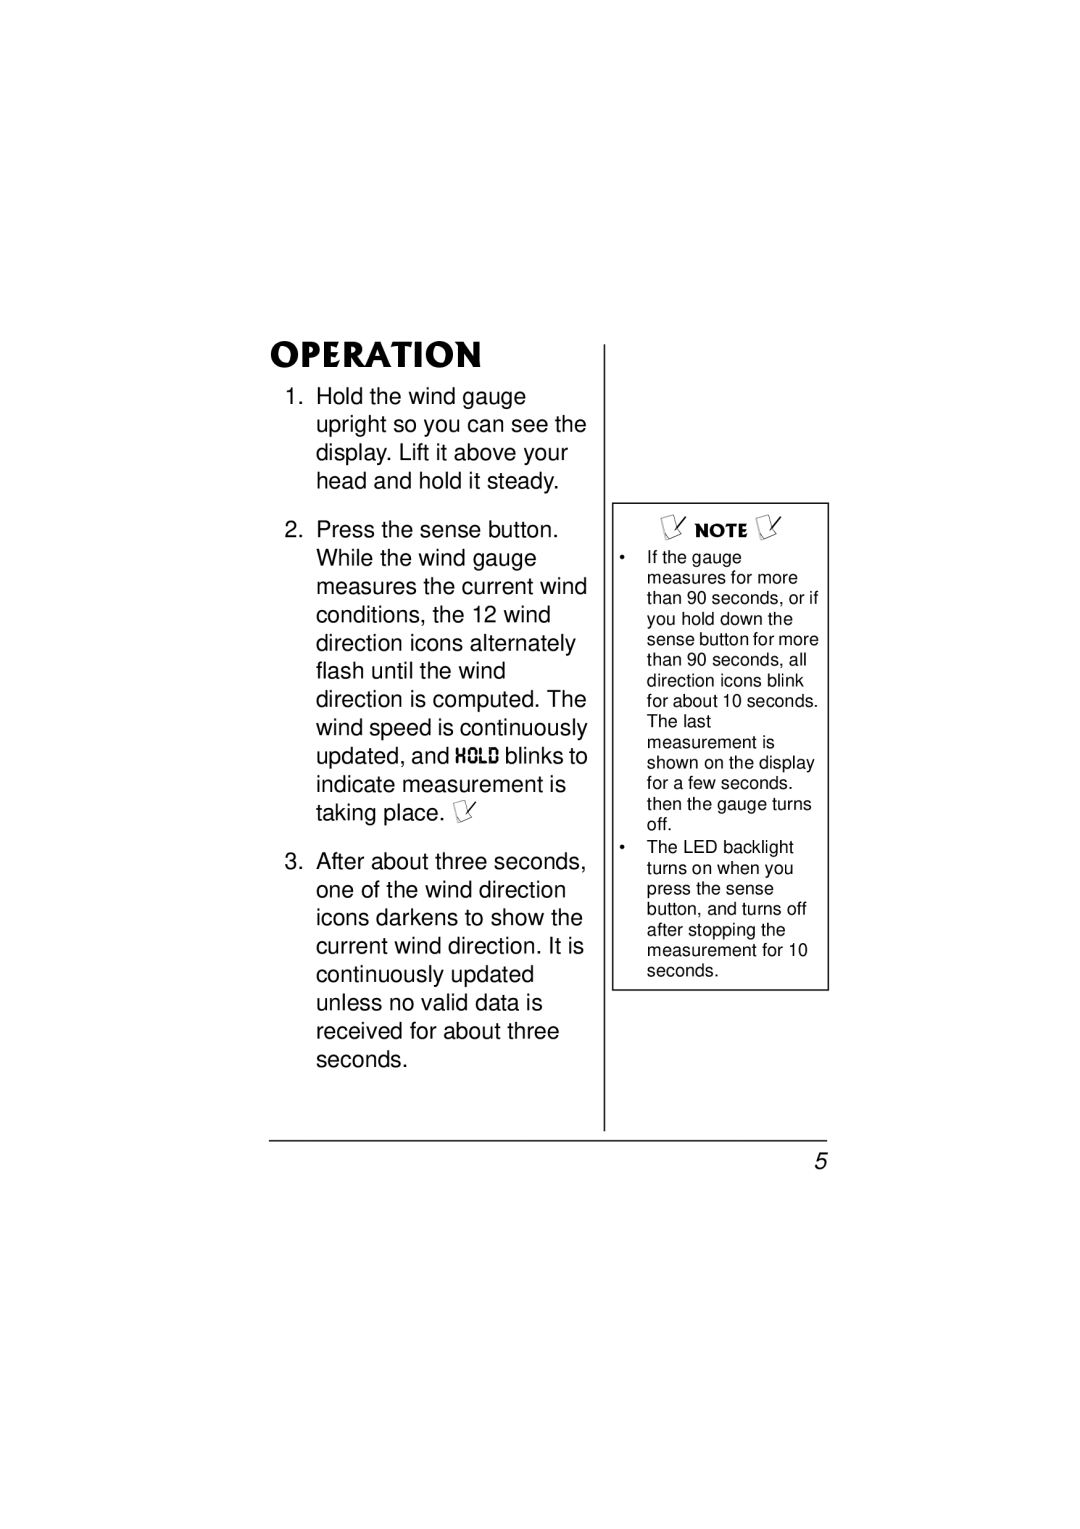 Radio Shack 63-1119 owner manual Operation, indicate measurement is taking place. Ô 